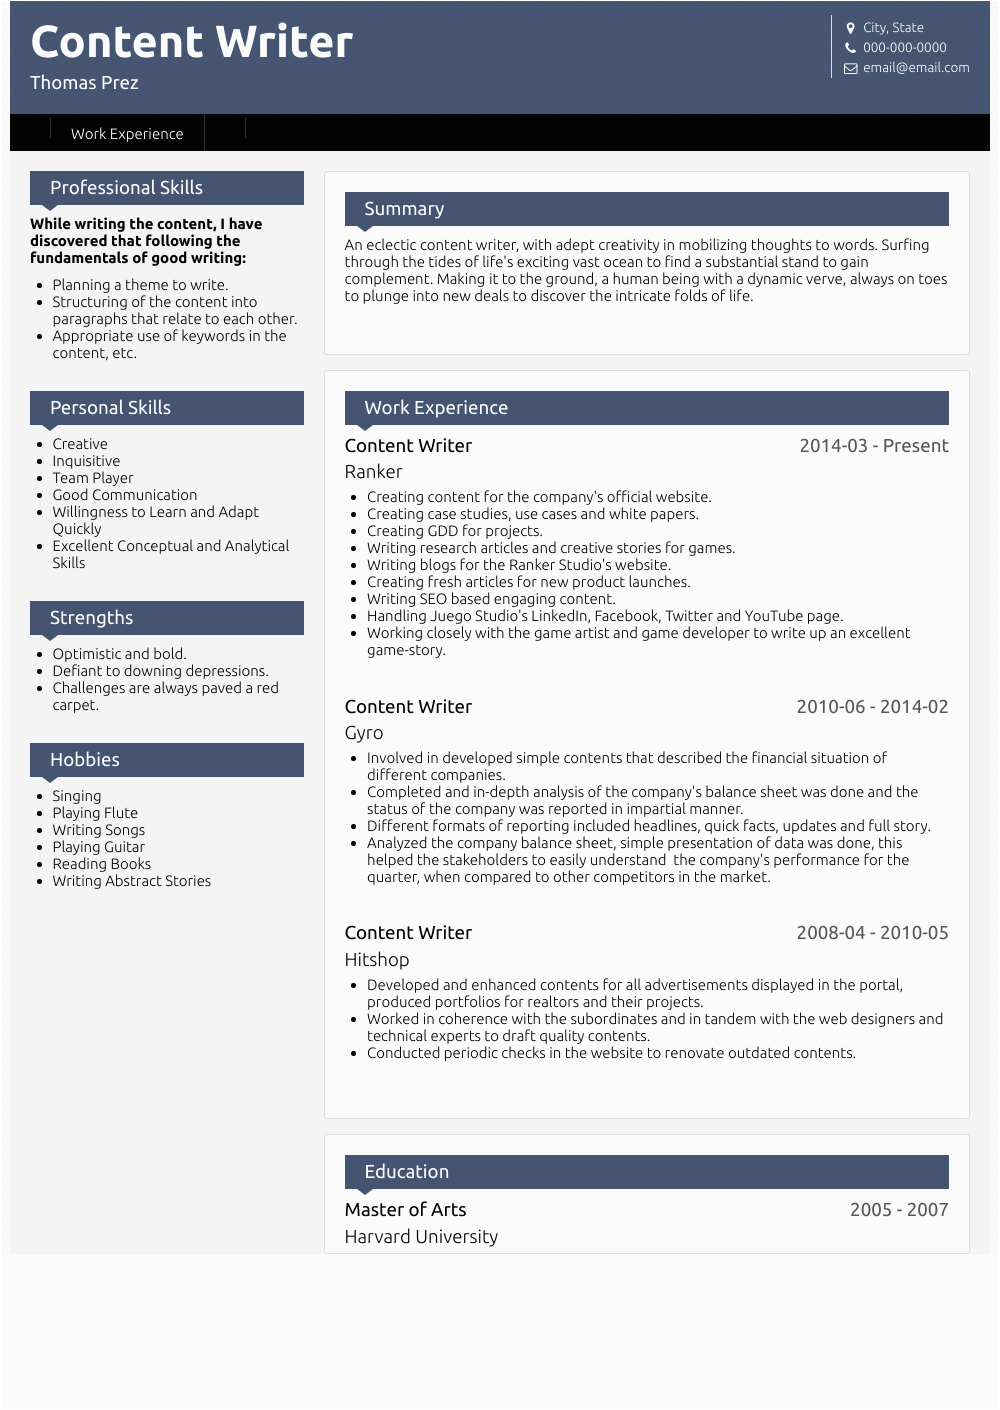 Content Writing Resume Sample for Freshers Content Writer Resume Samples 1 Resource for Templates